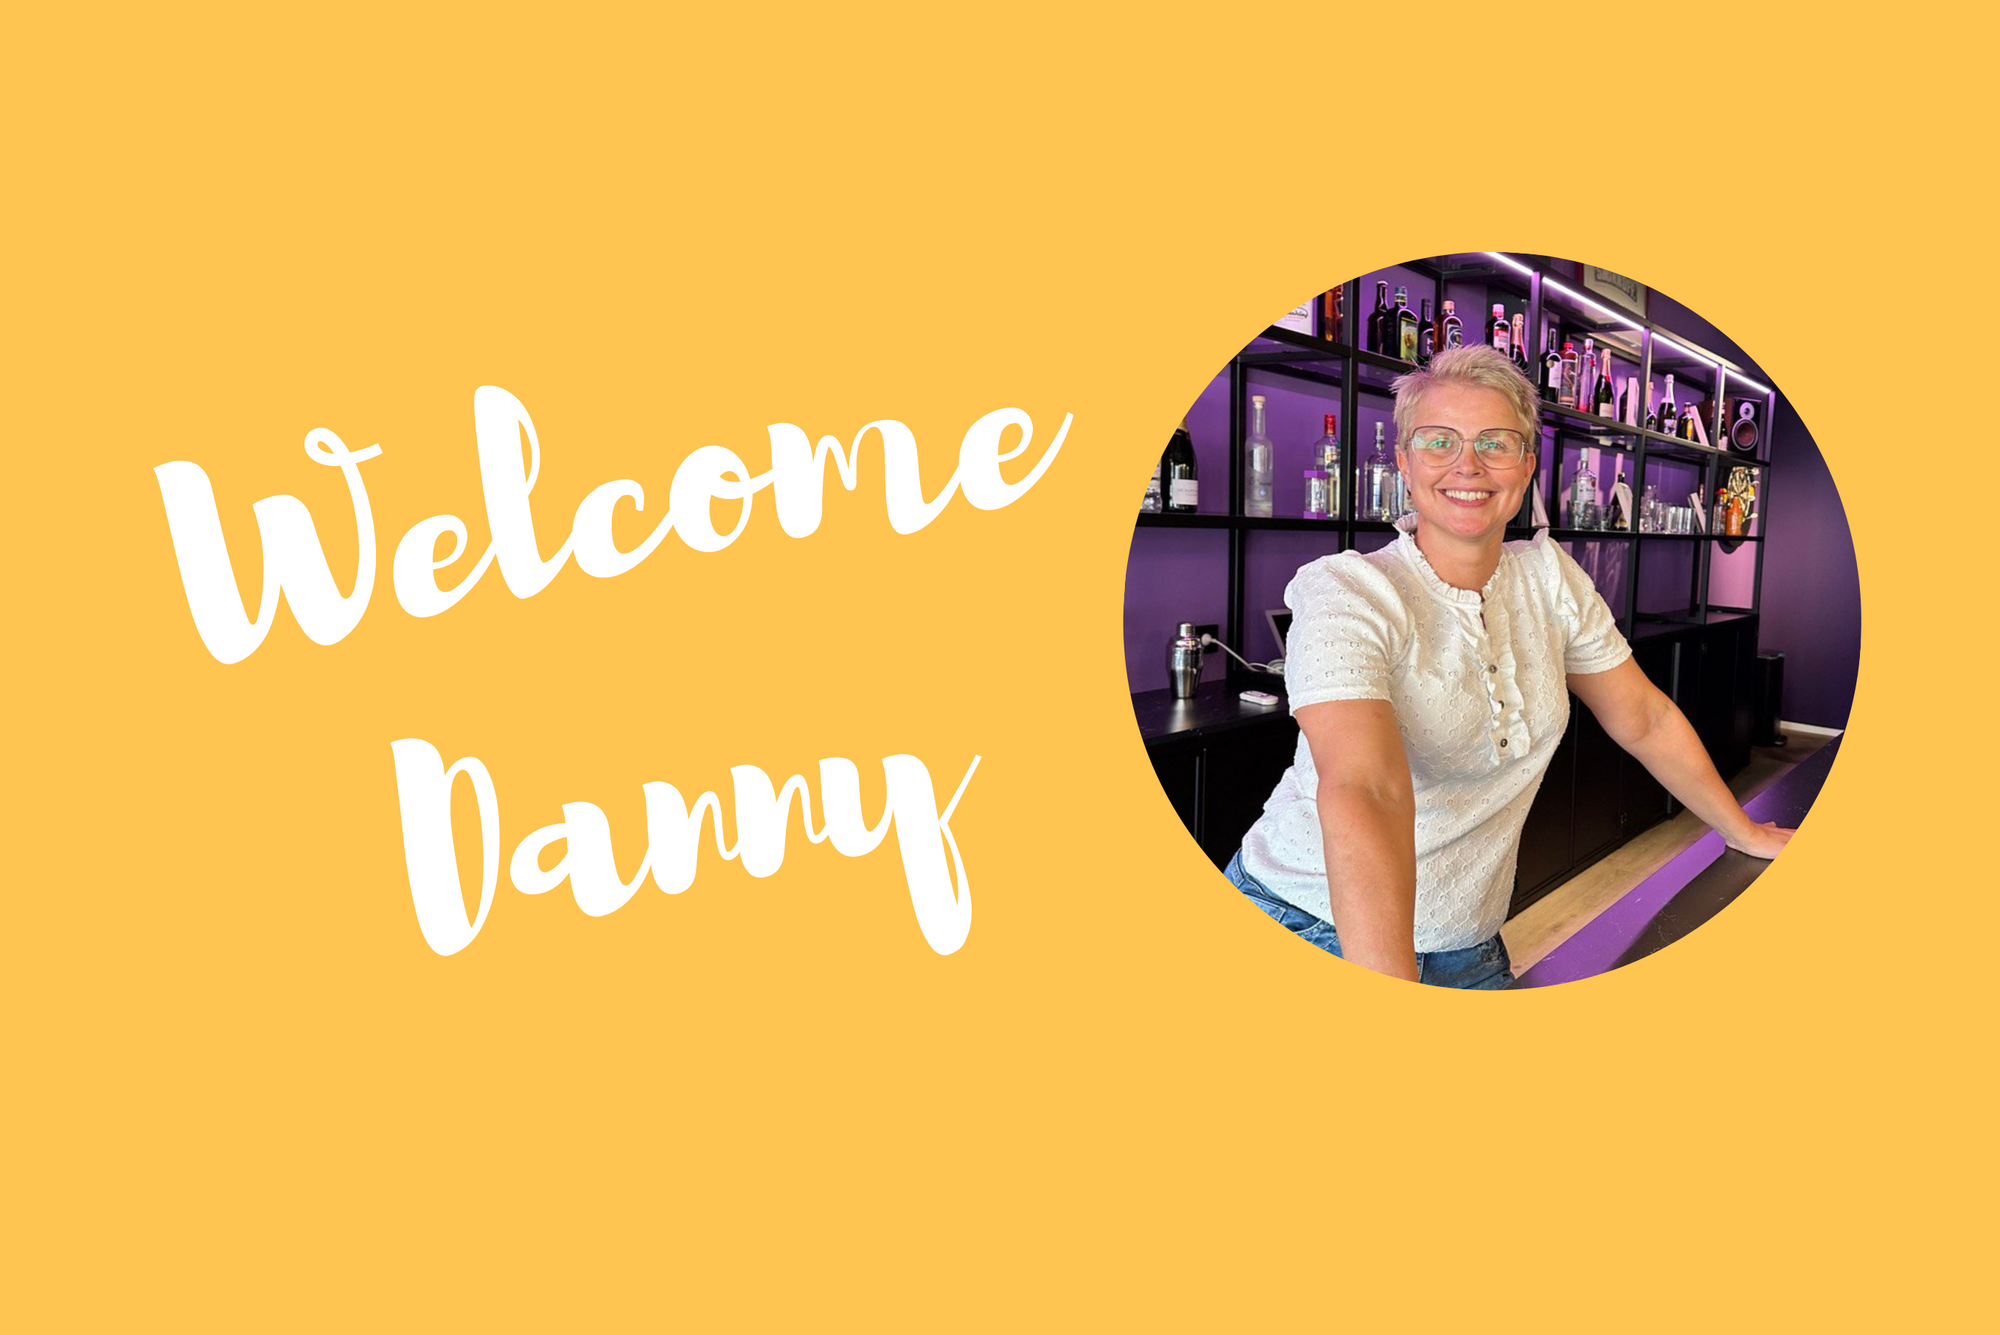 Welcome Danny!